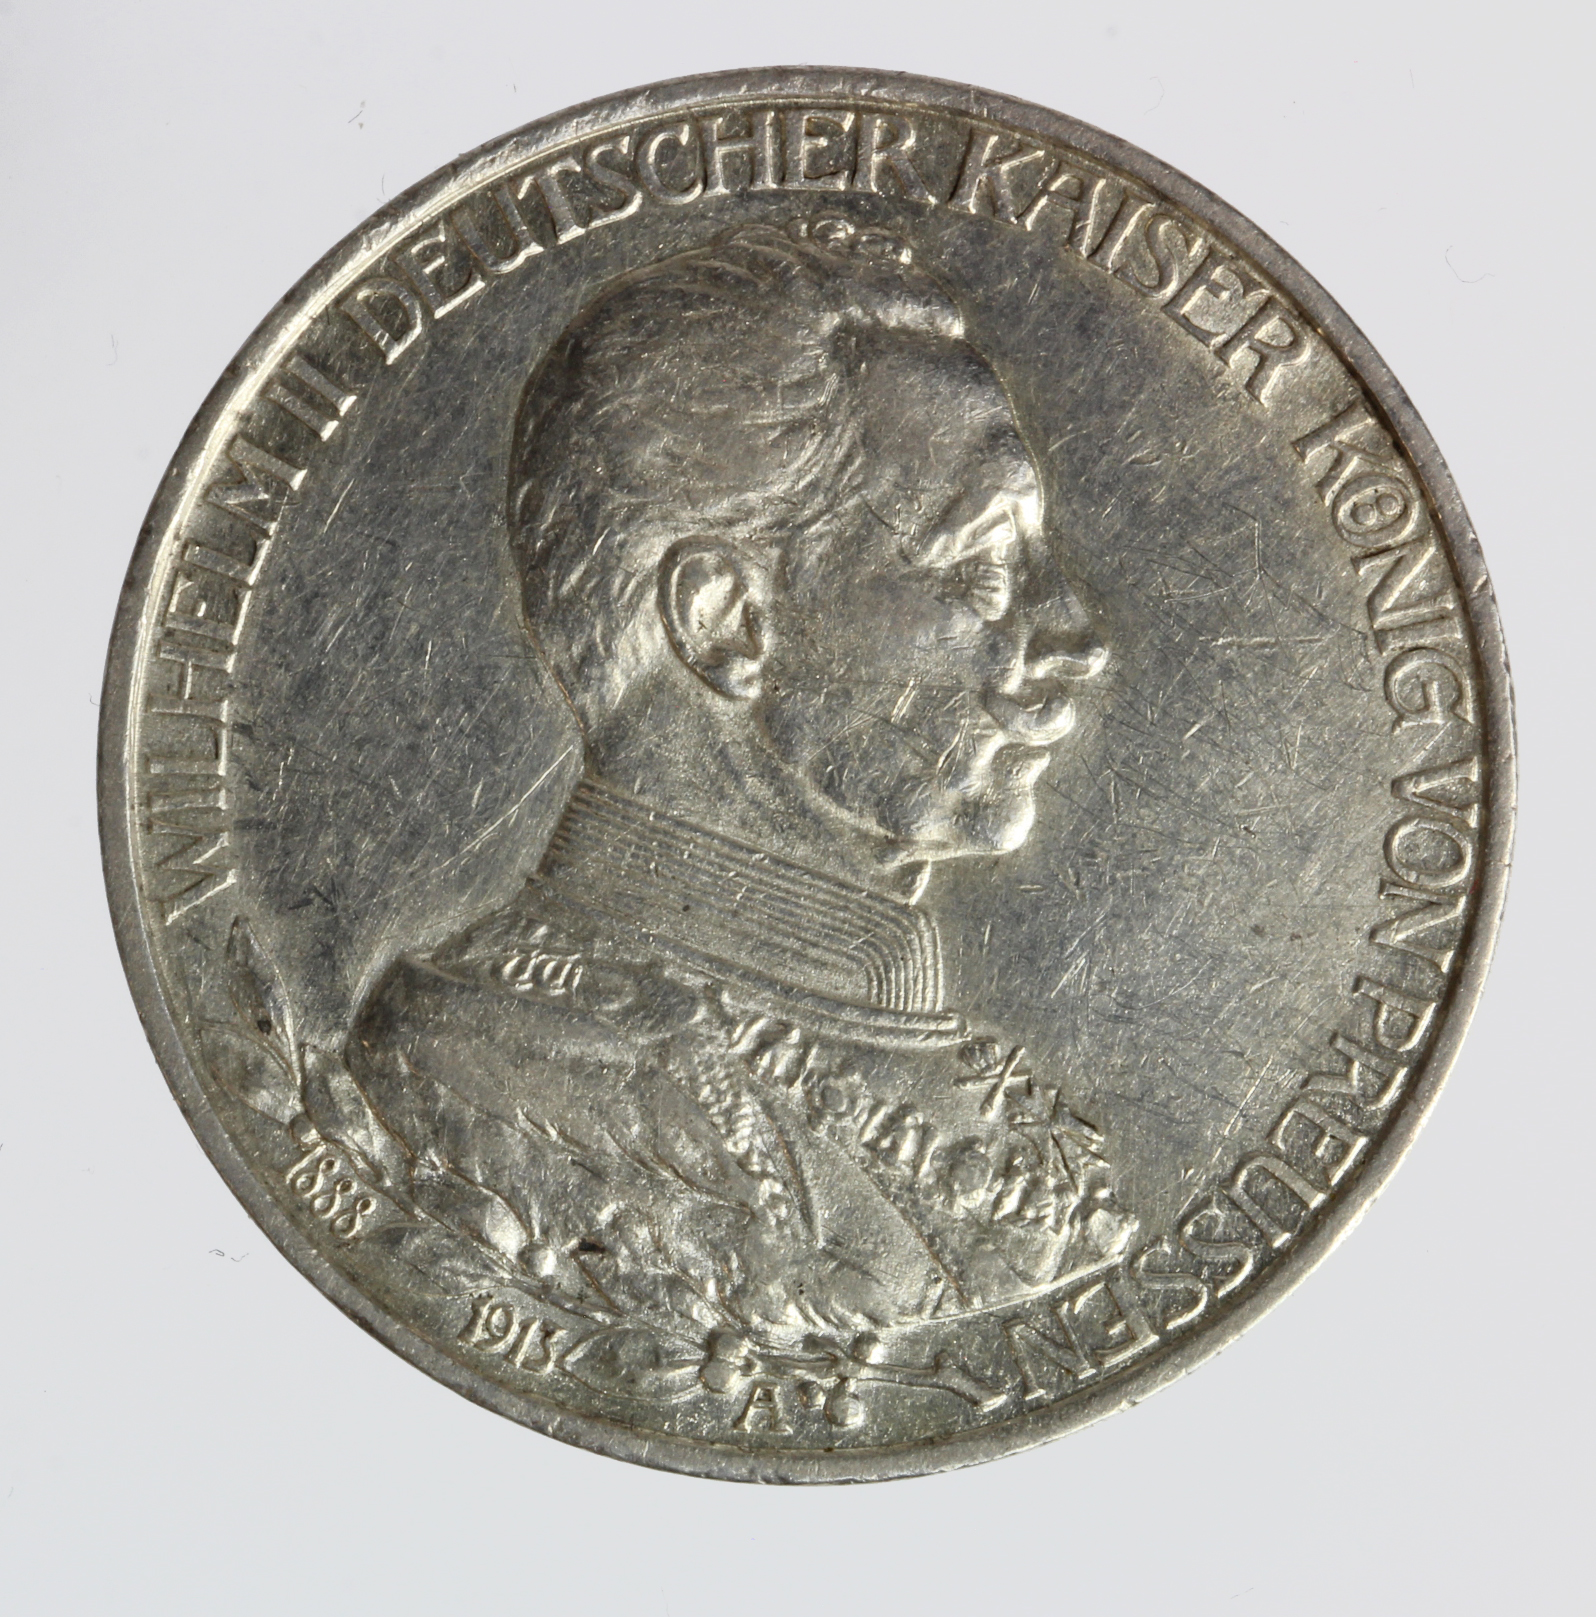 Germany silver 3 marks for the Silver Jubilee of Wilhelm II, 1913A, light ovalall marks on